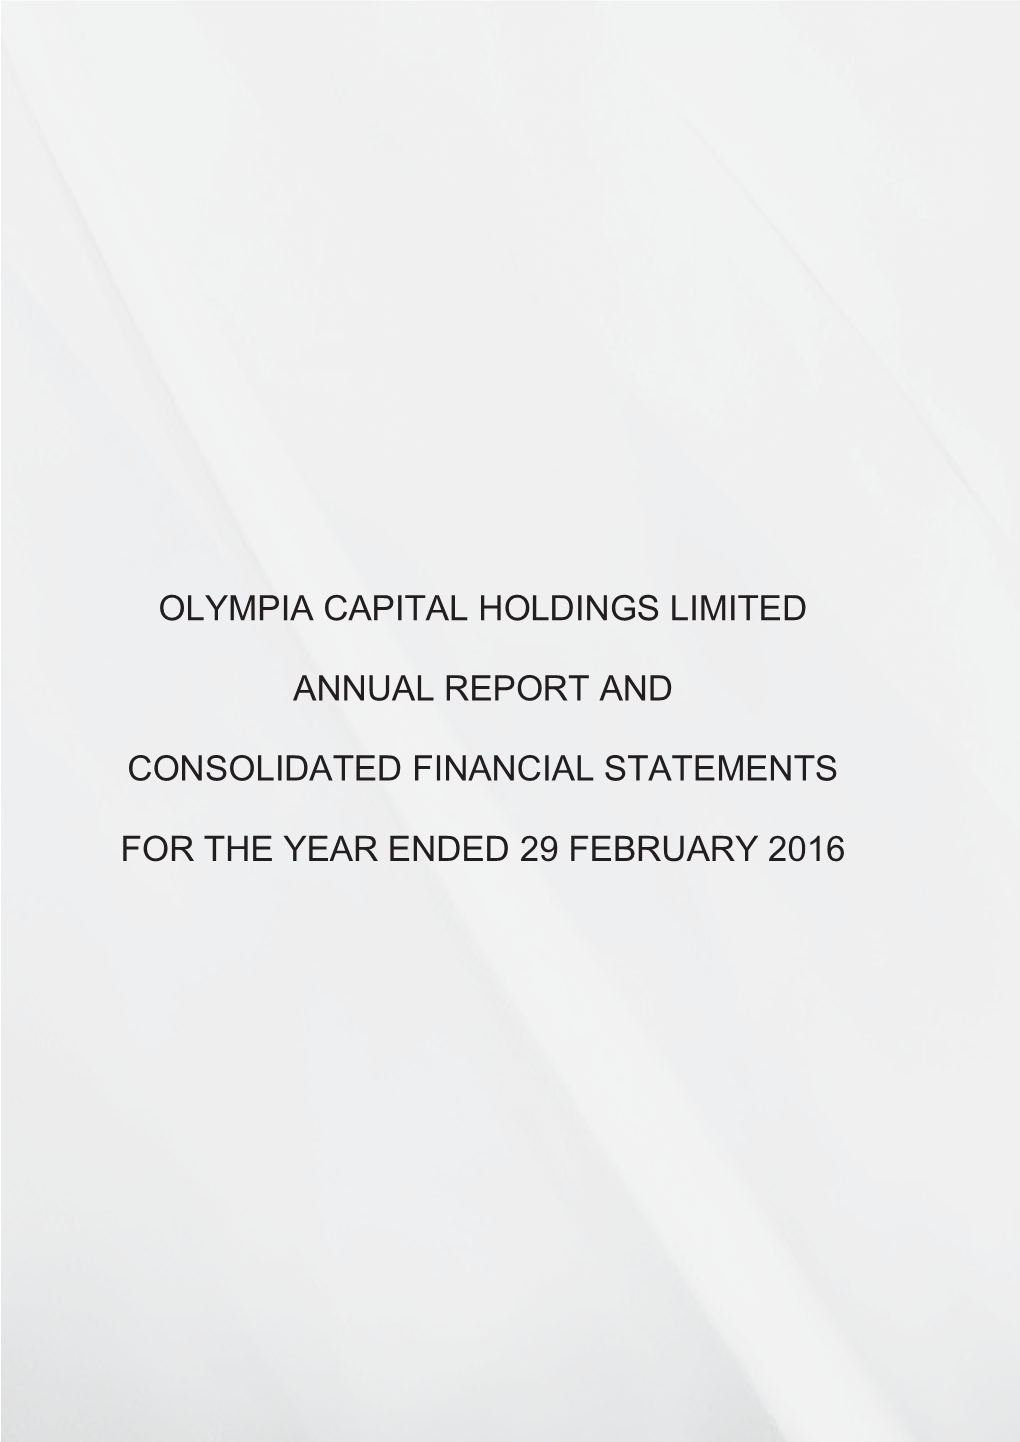 Olympia Capital Holdings Limited Annual Report and Consolidated Financial Statements for the Year Ended 29 February 2016